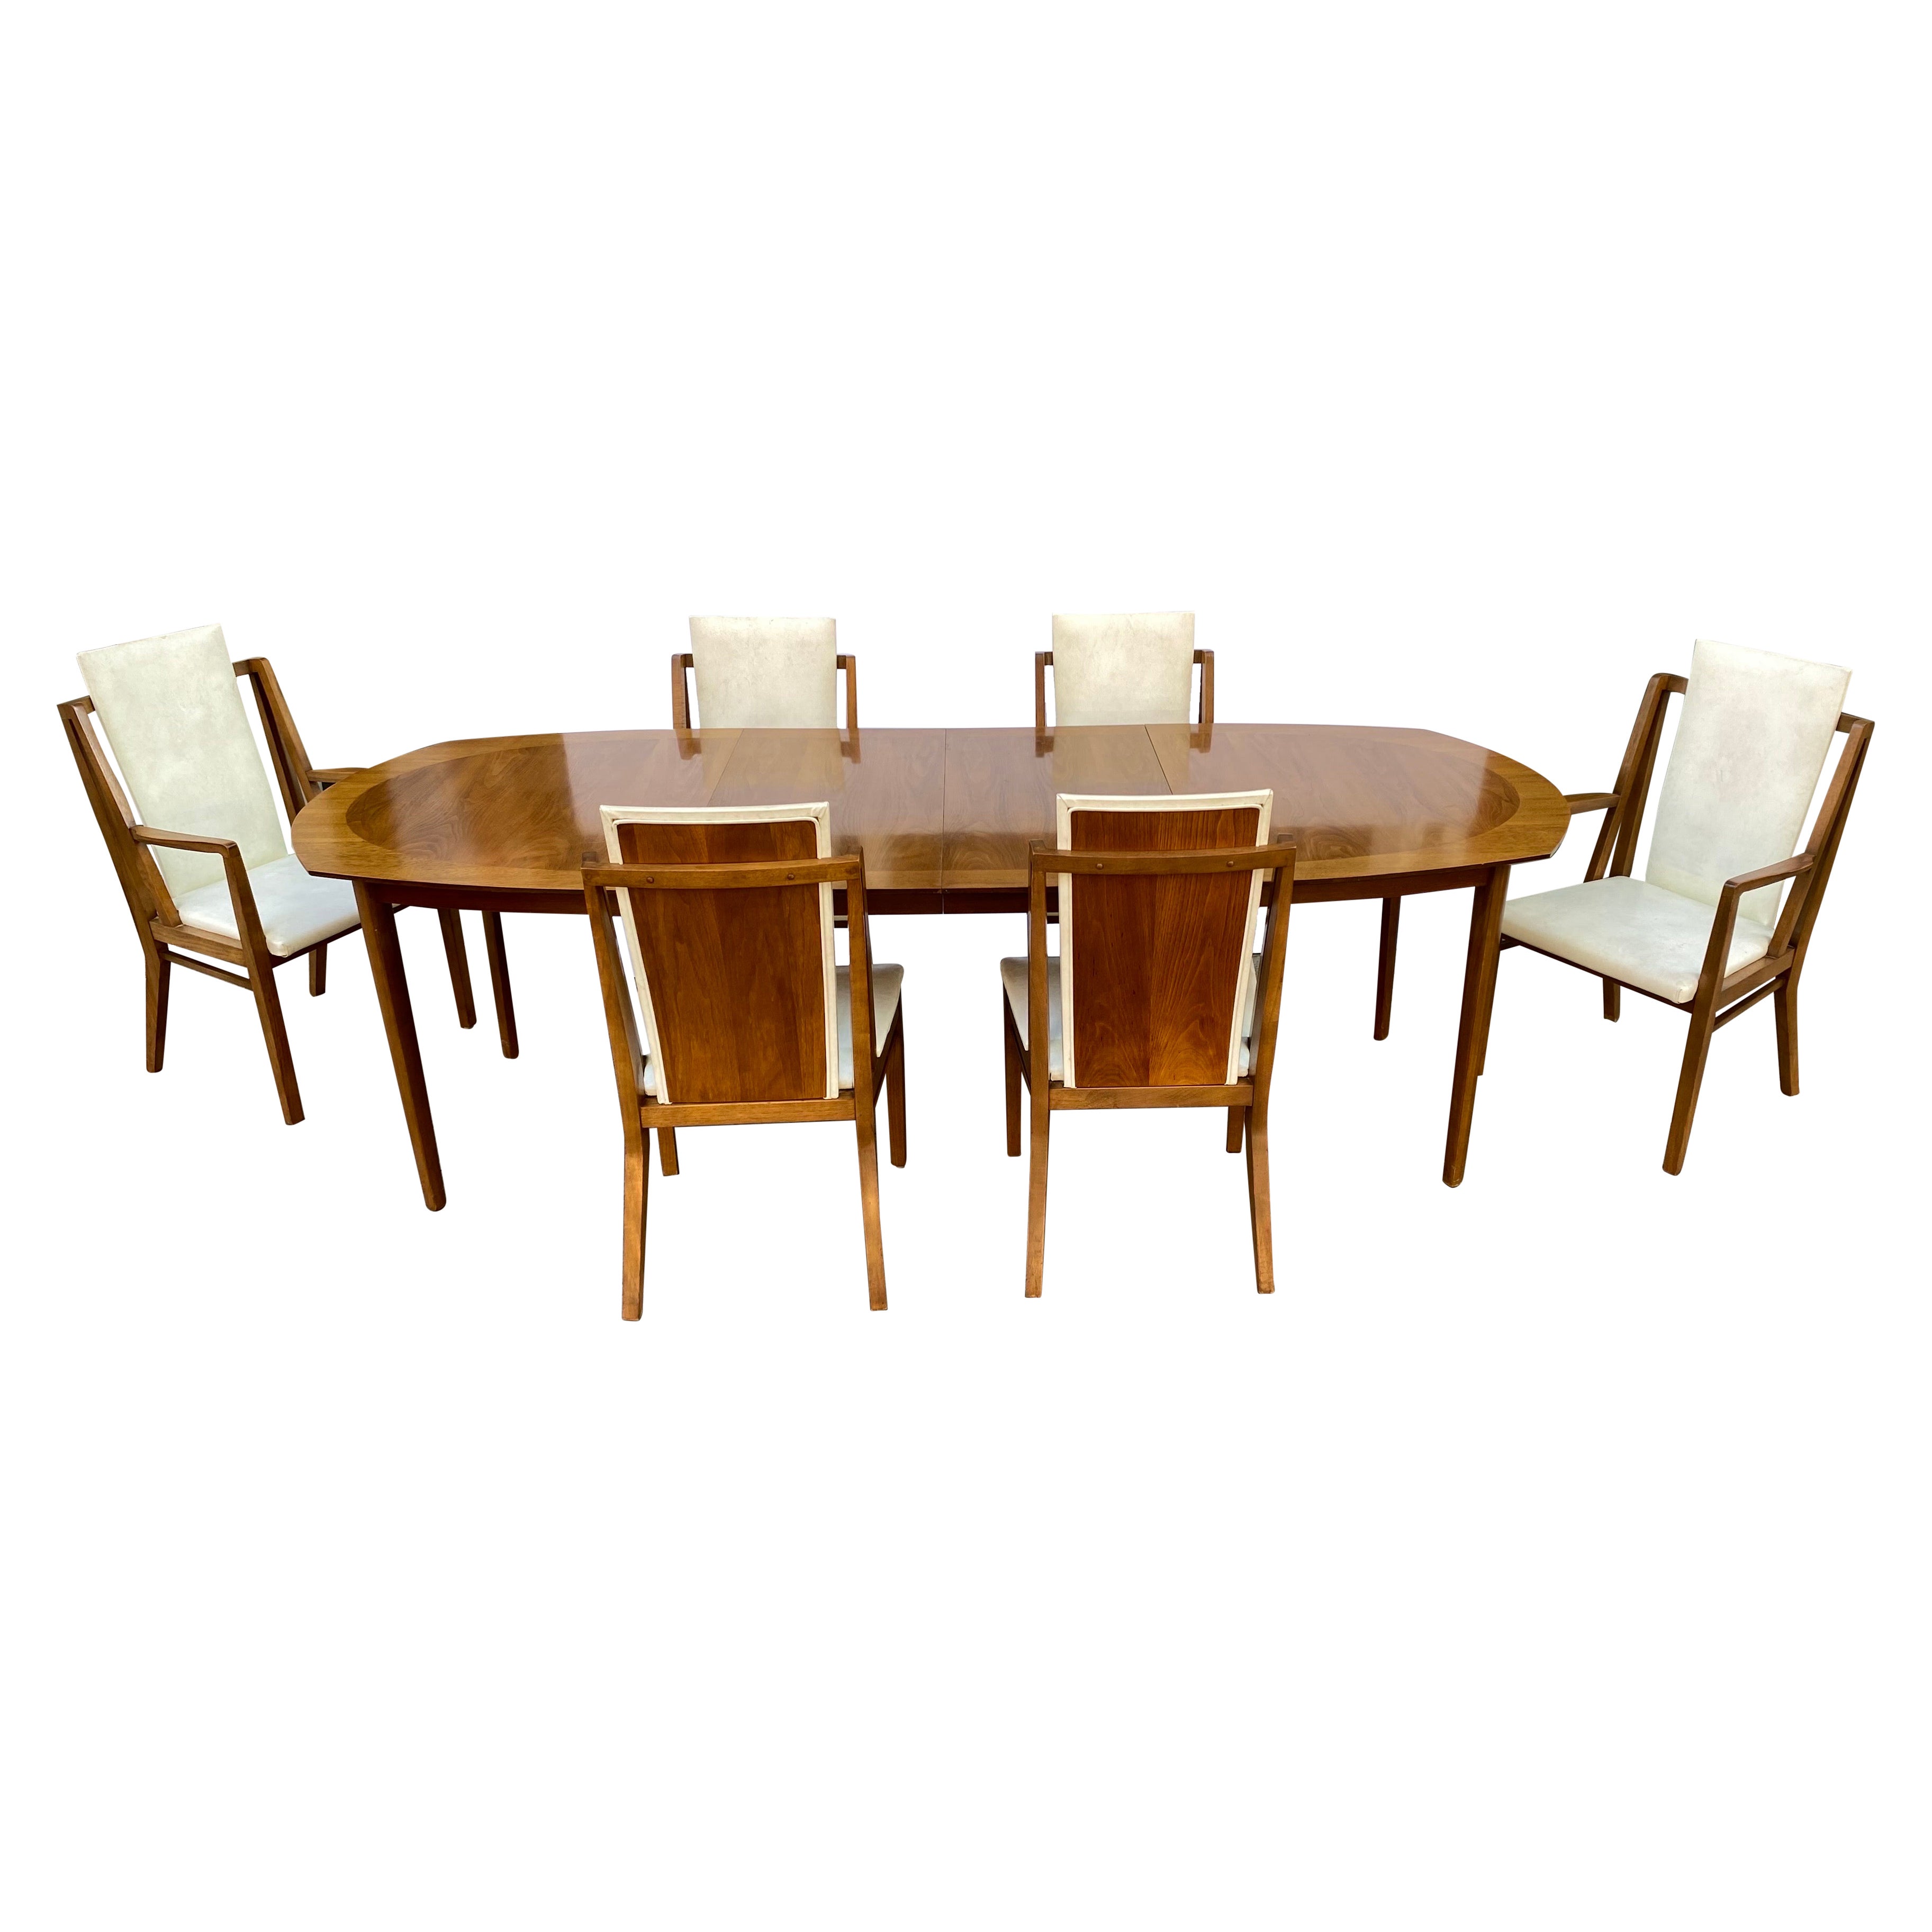 Drexel Design for Living Table and 6 Chairs